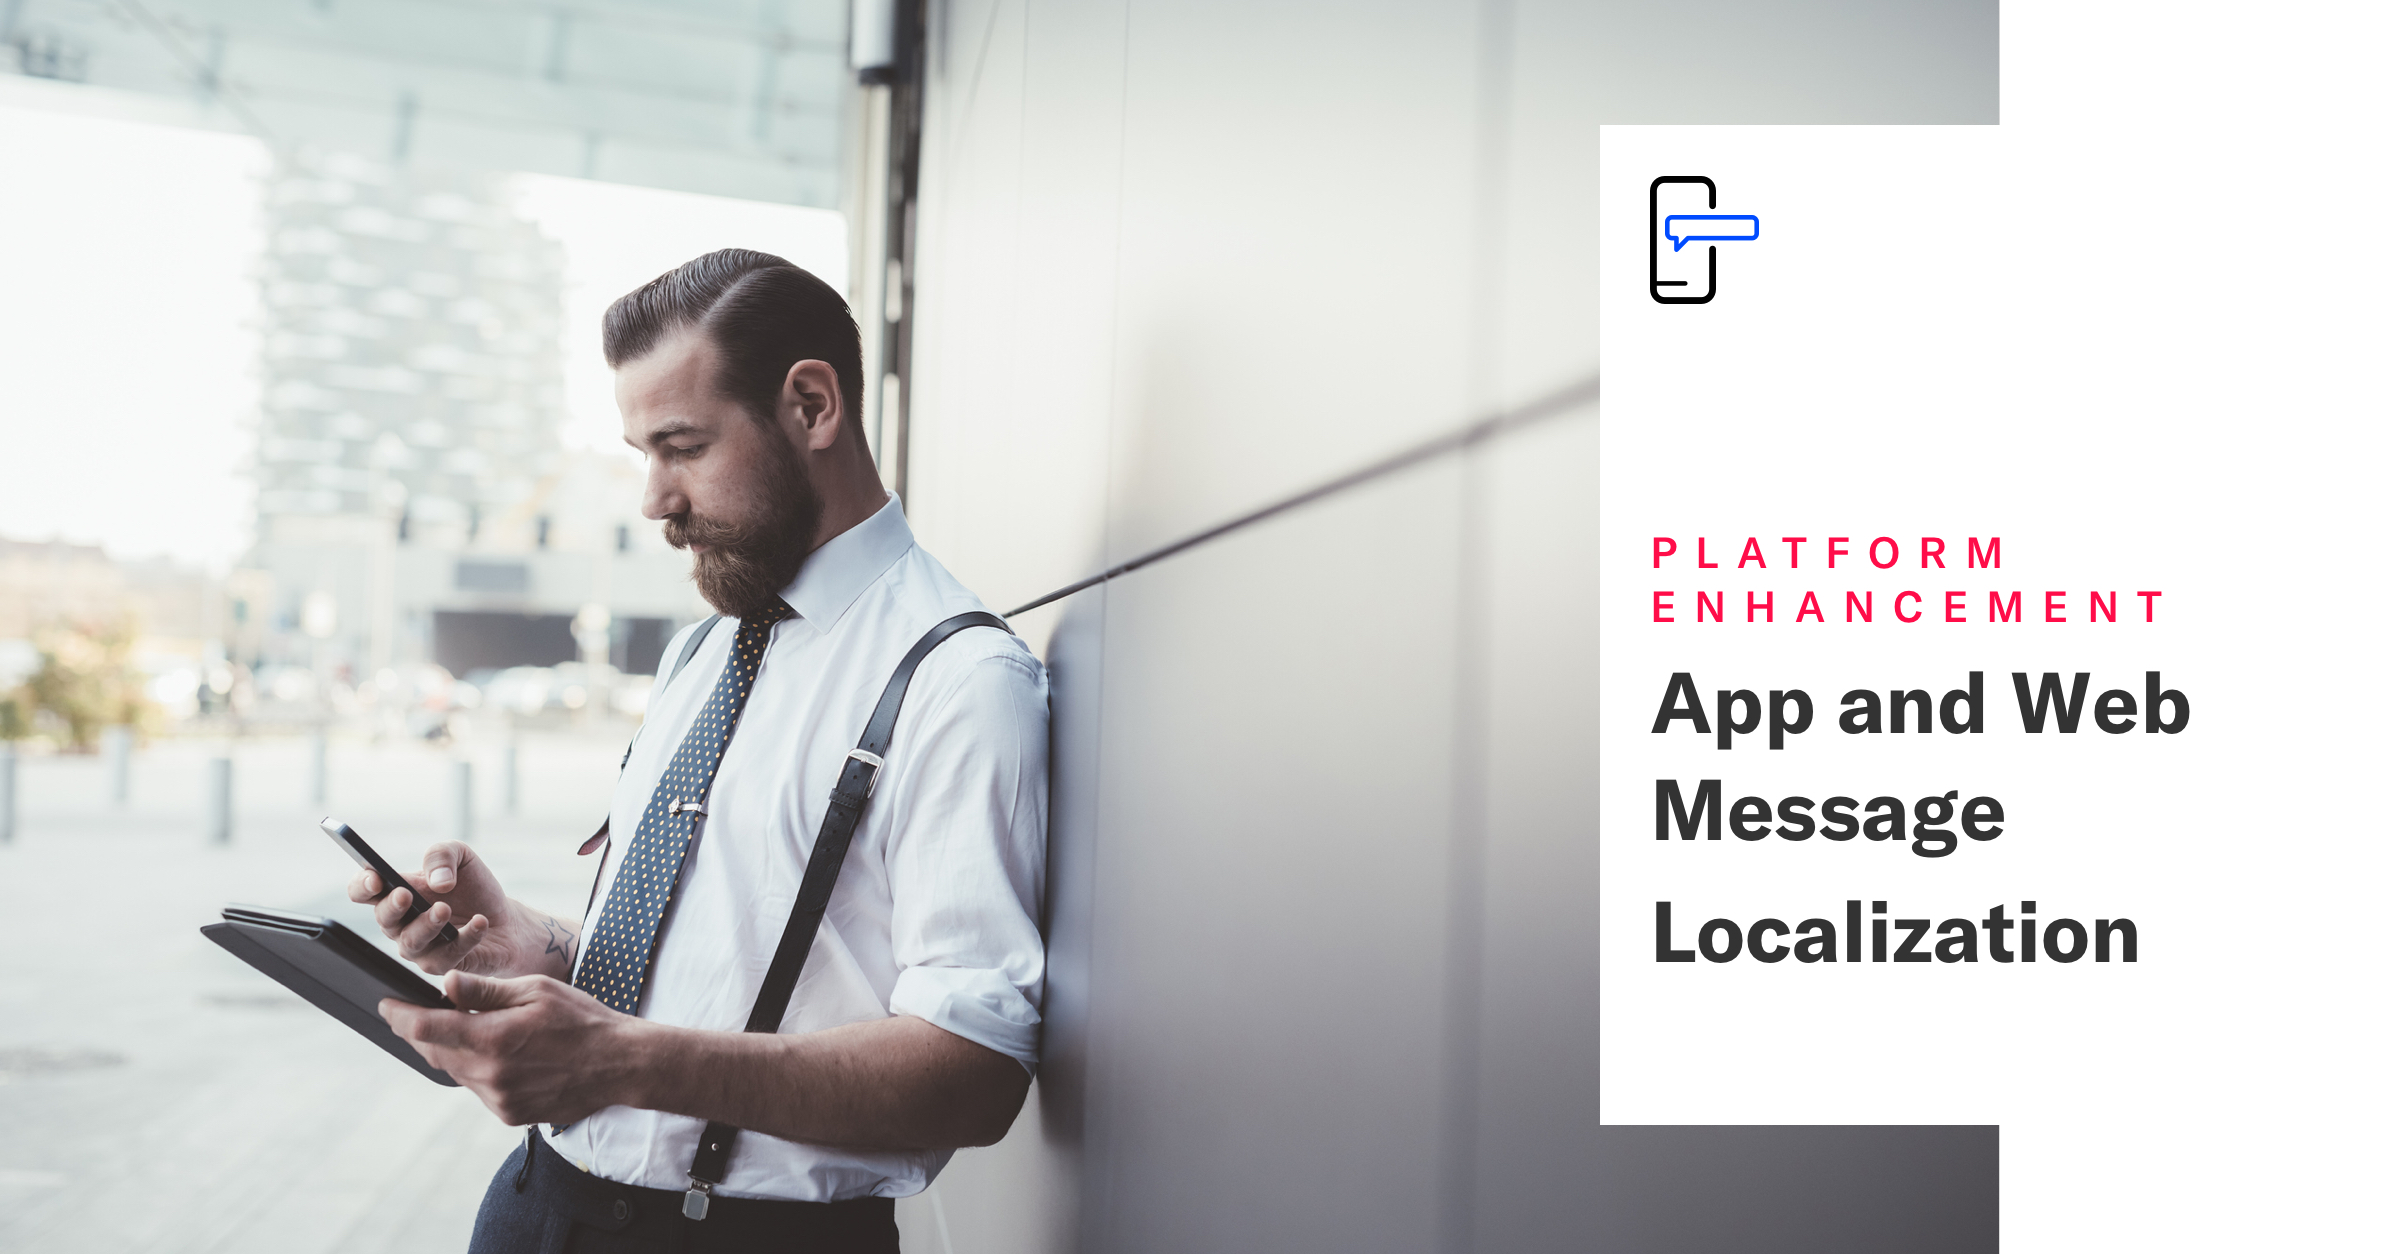 Localization for App and Web Messages